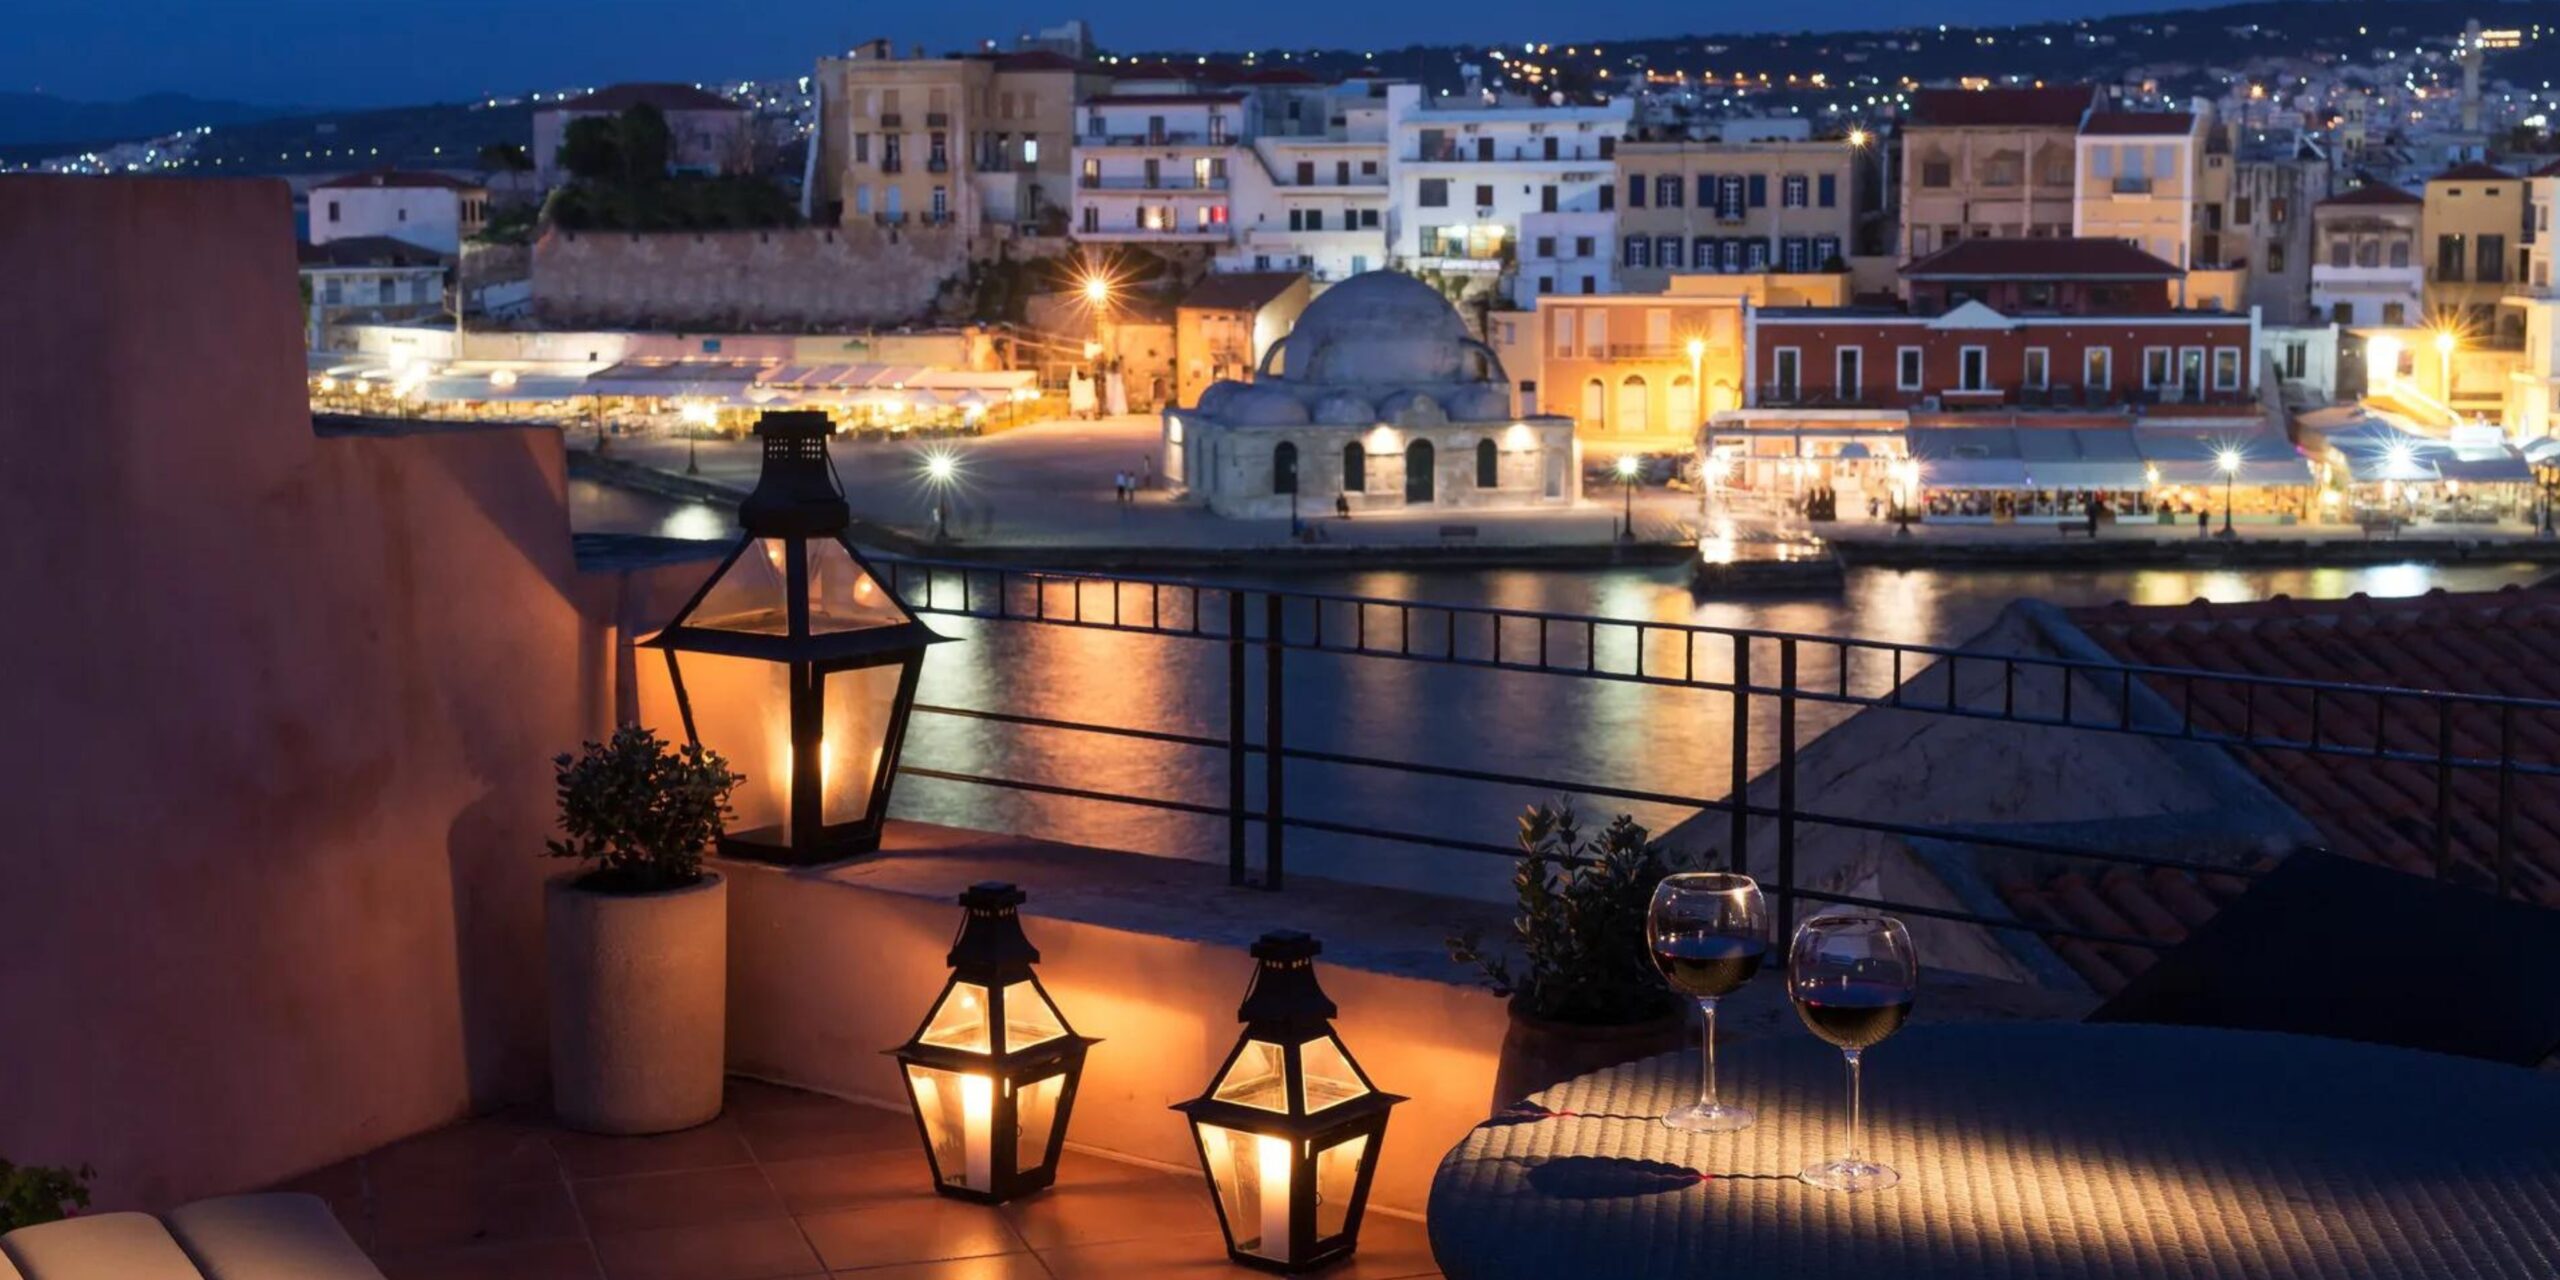 Evening view from a balcony with lanterns, overlooking a coastal town and waterfront.